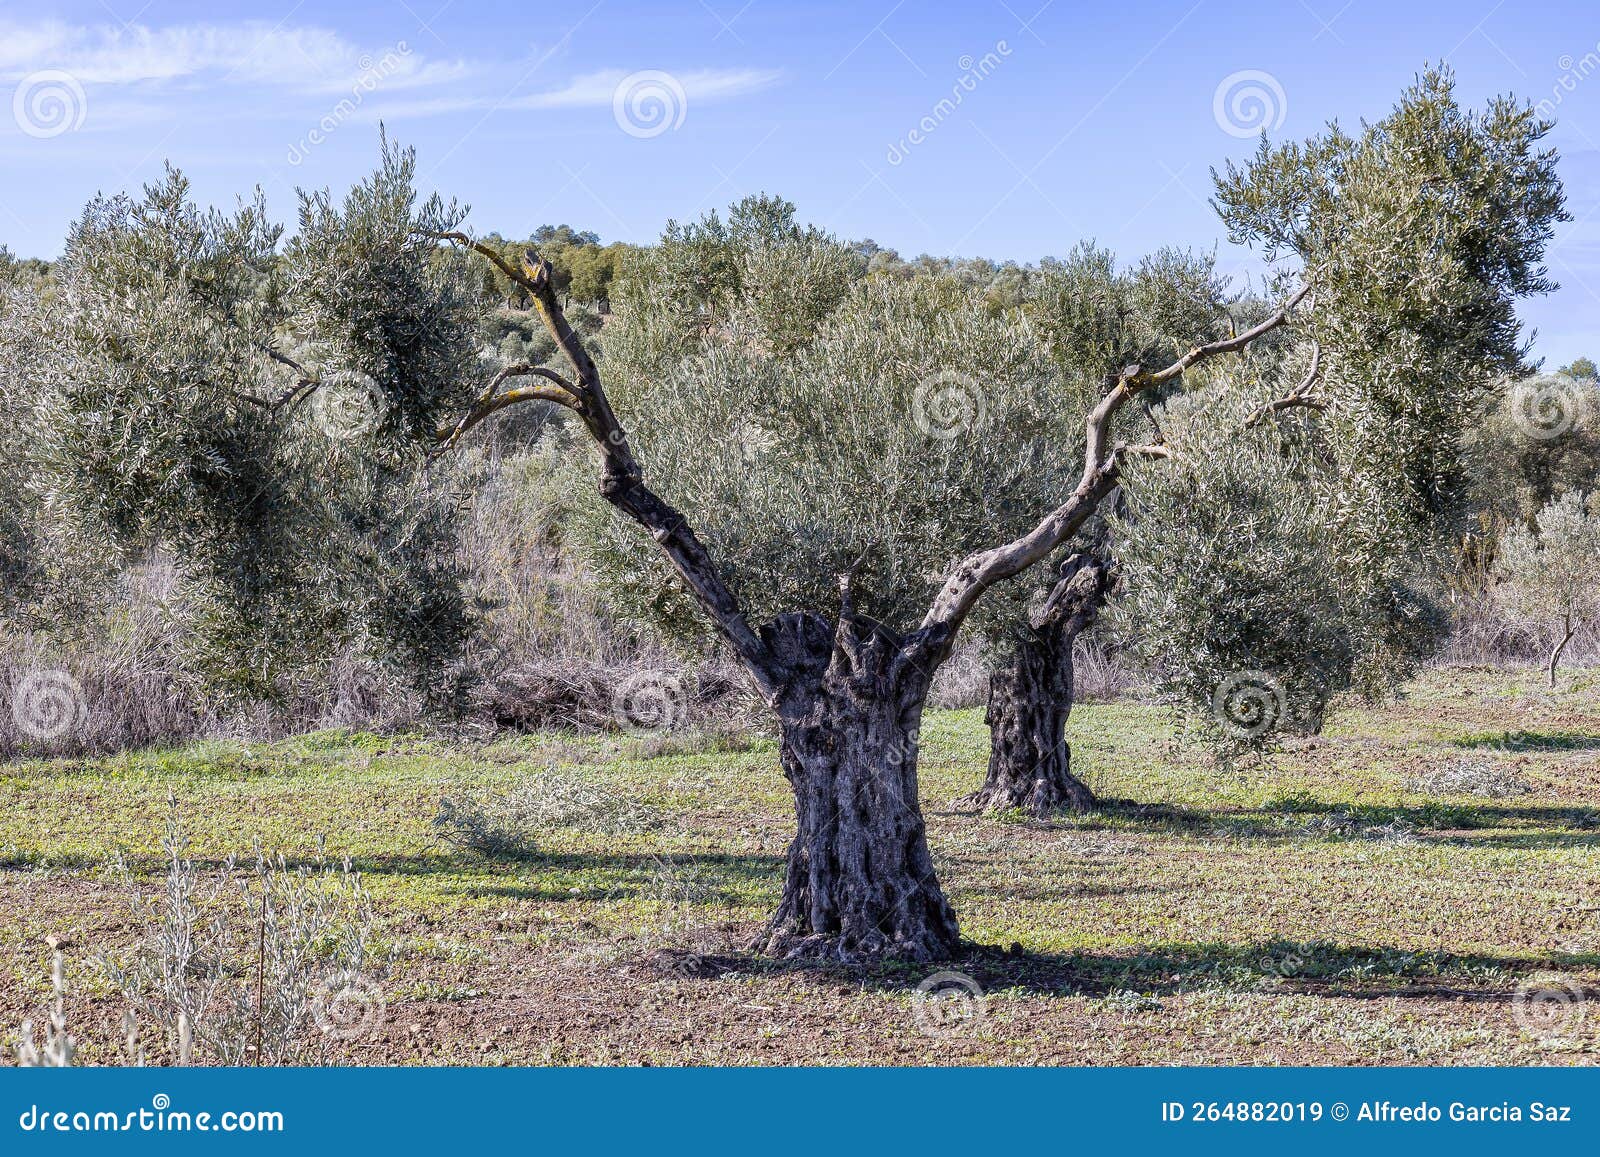 millenary olive tree in an olive plantation for the production of extra virgin olive oil in andalusia, spain